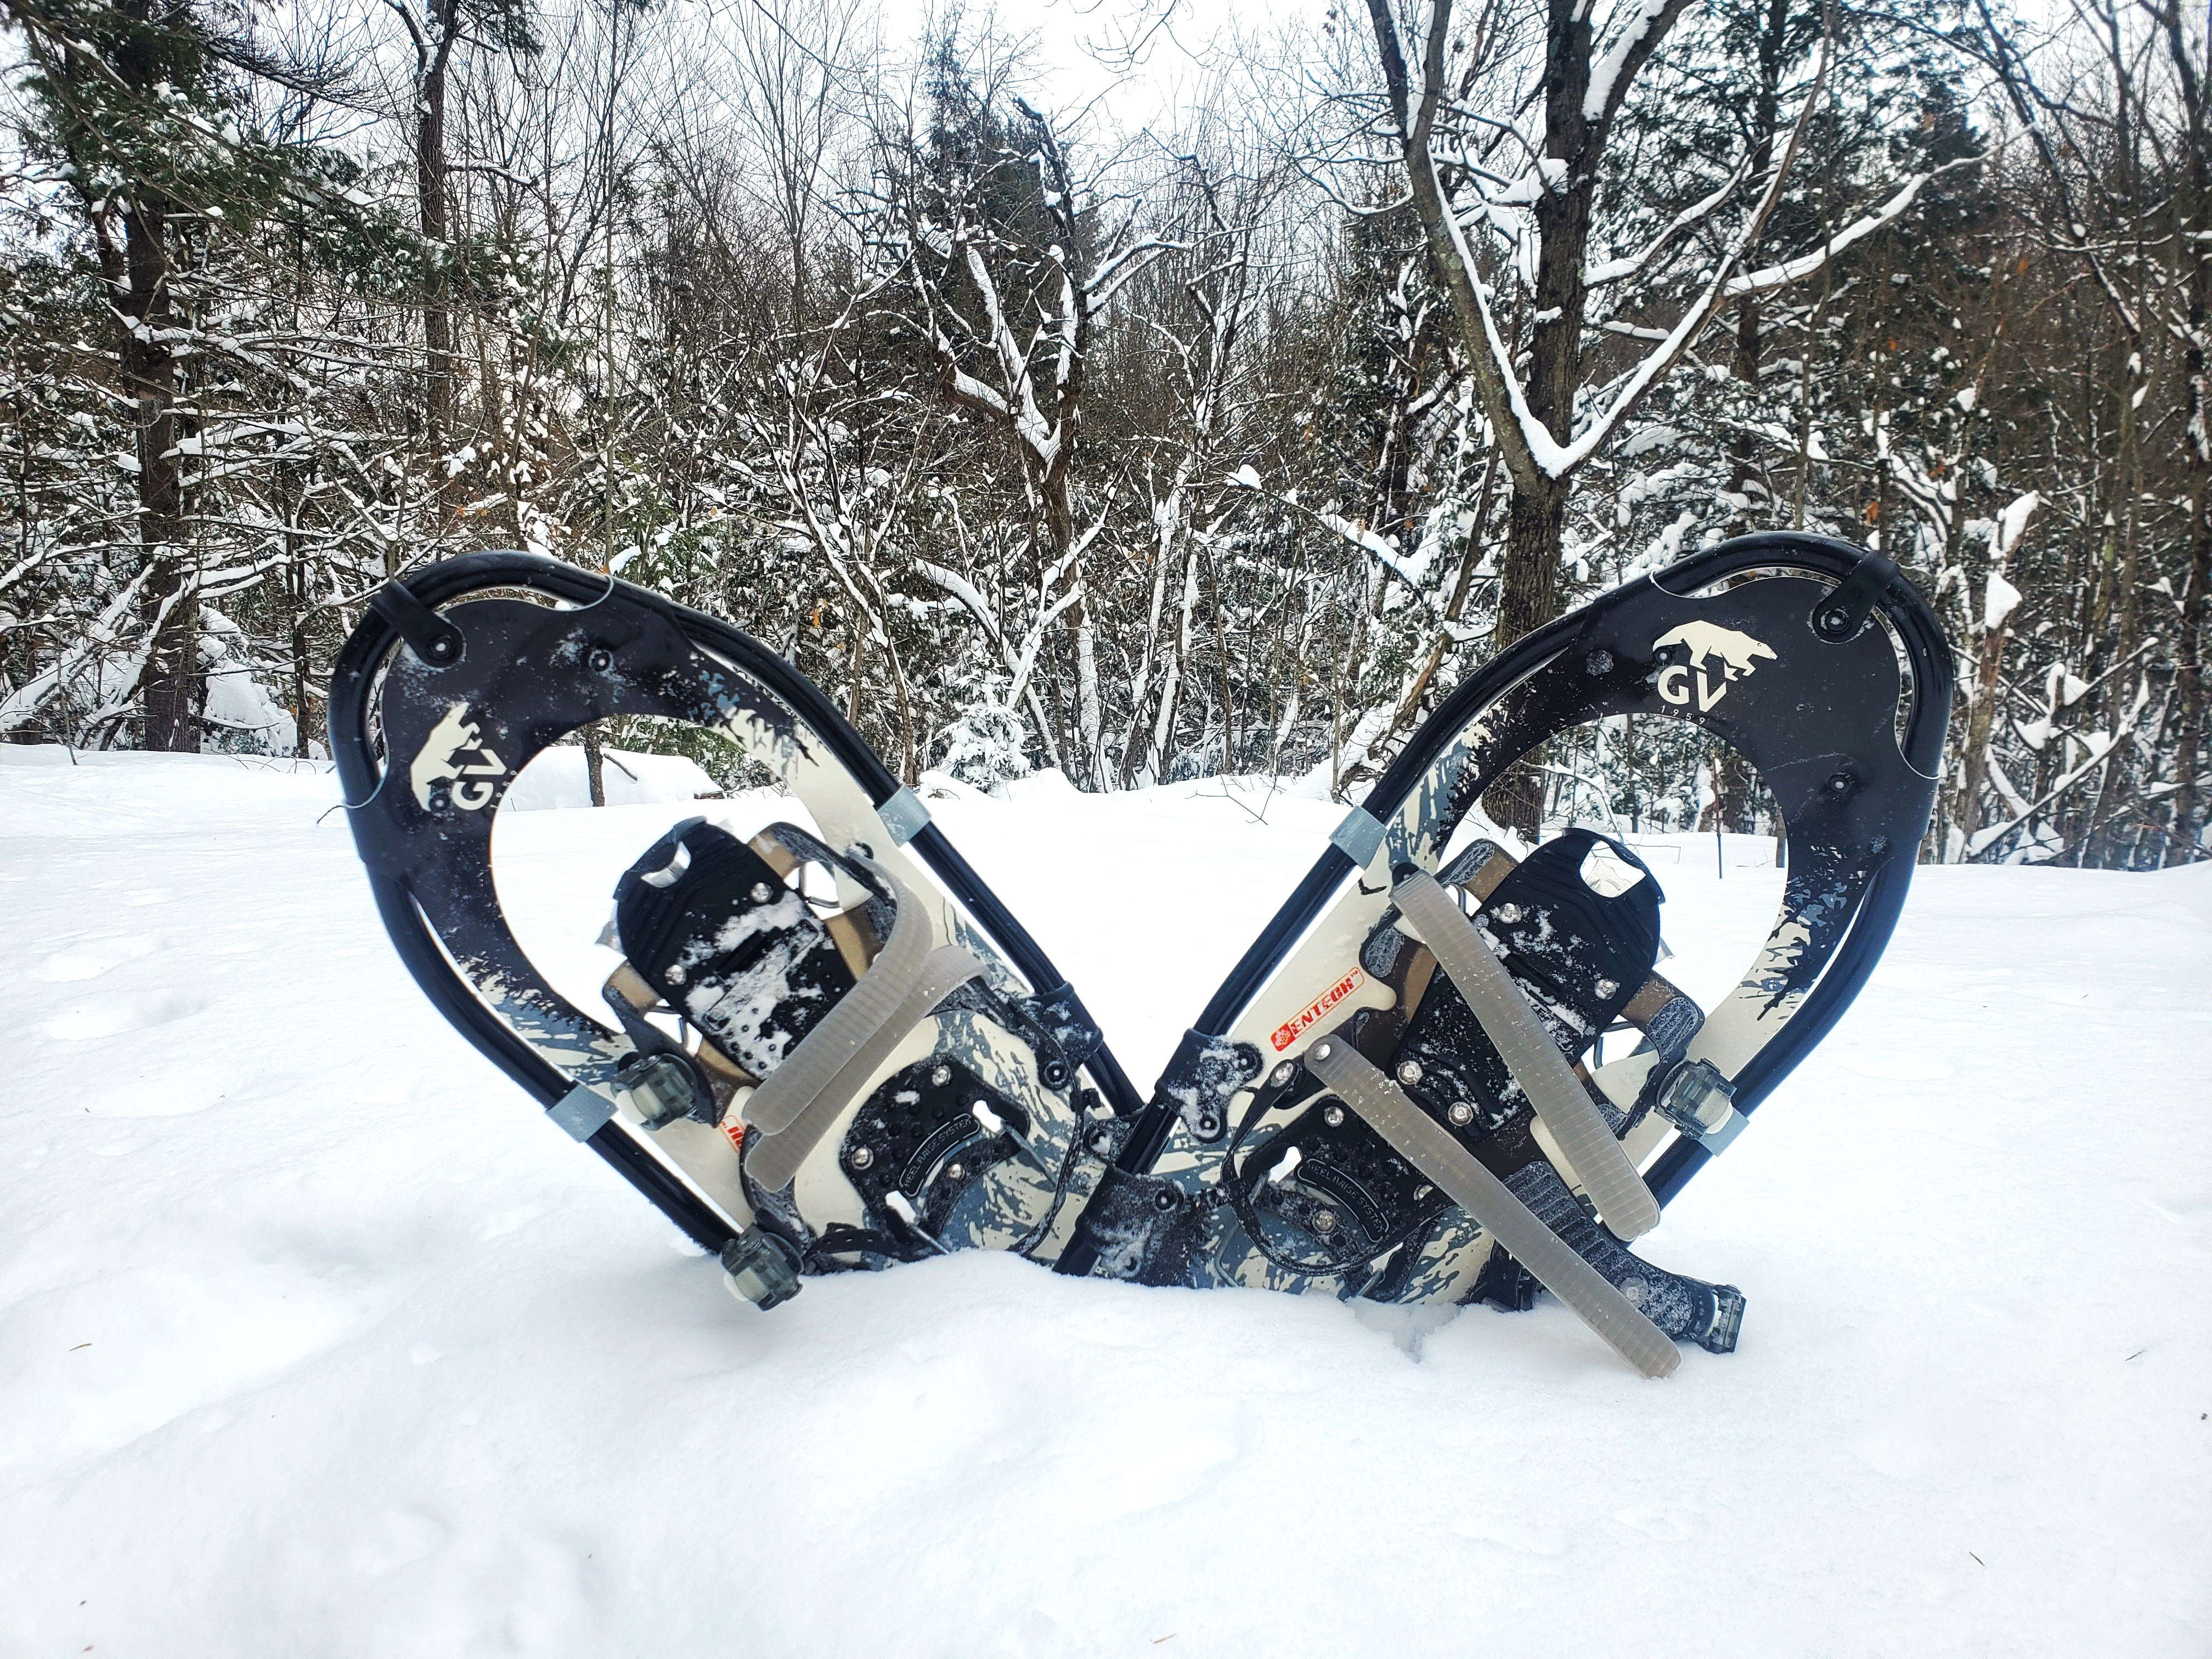 GV SNOWSHOES MOUNTAIN TRAIL ALLIGATOR REVIEW